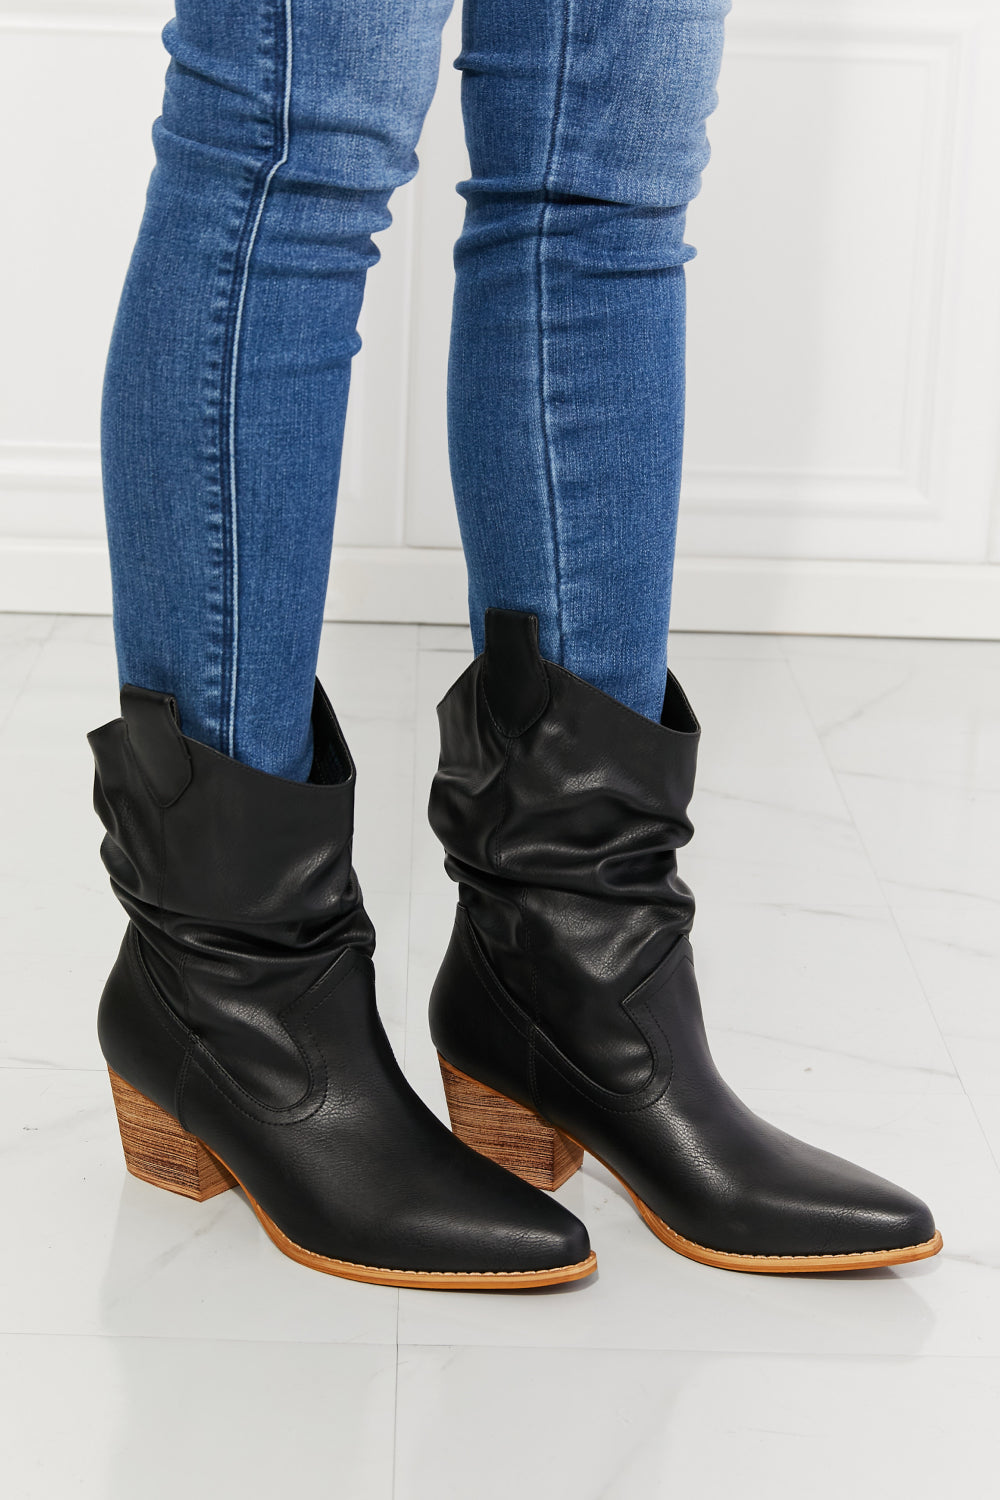 MMShoes Better in Texas Scrunch Cowboy Boots in Black - FunkyPeacockStore (Store description)